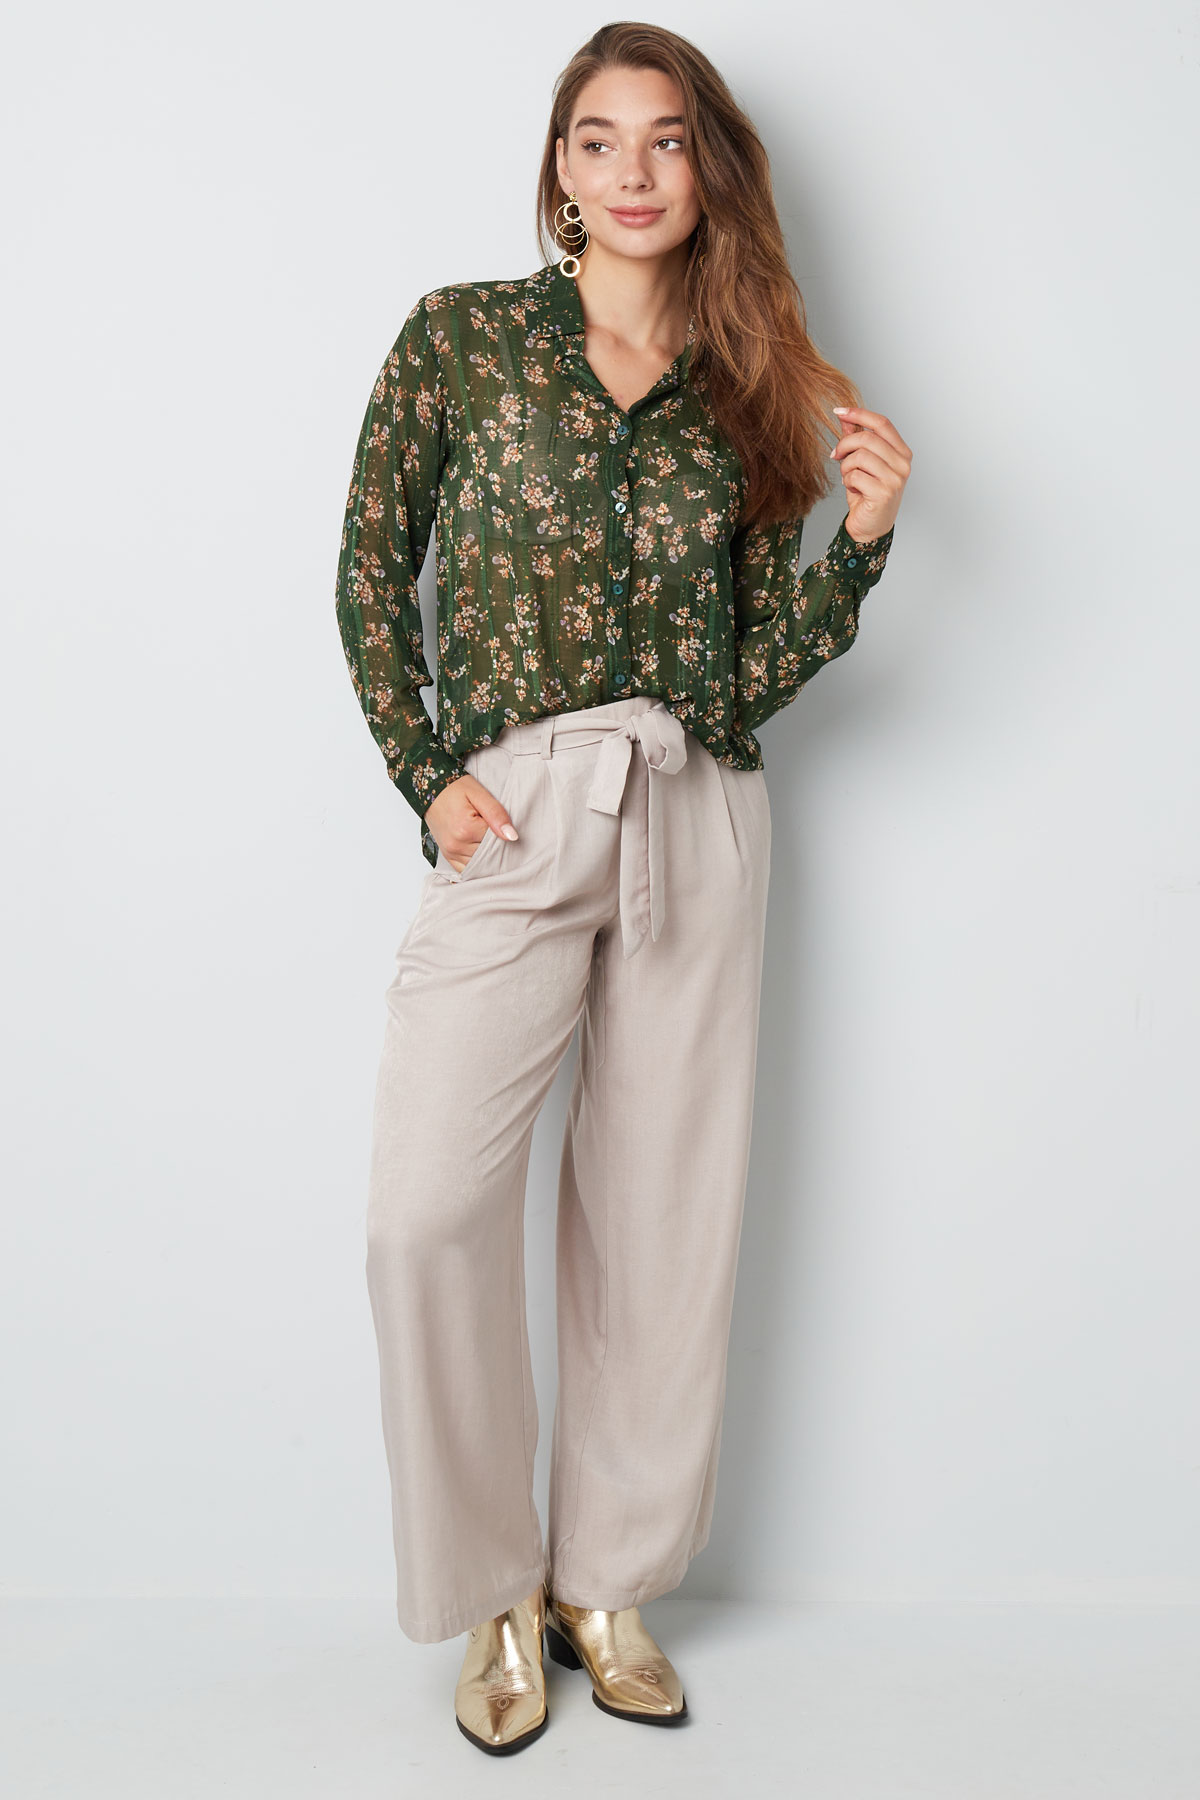 Blouse floral print green Picture6